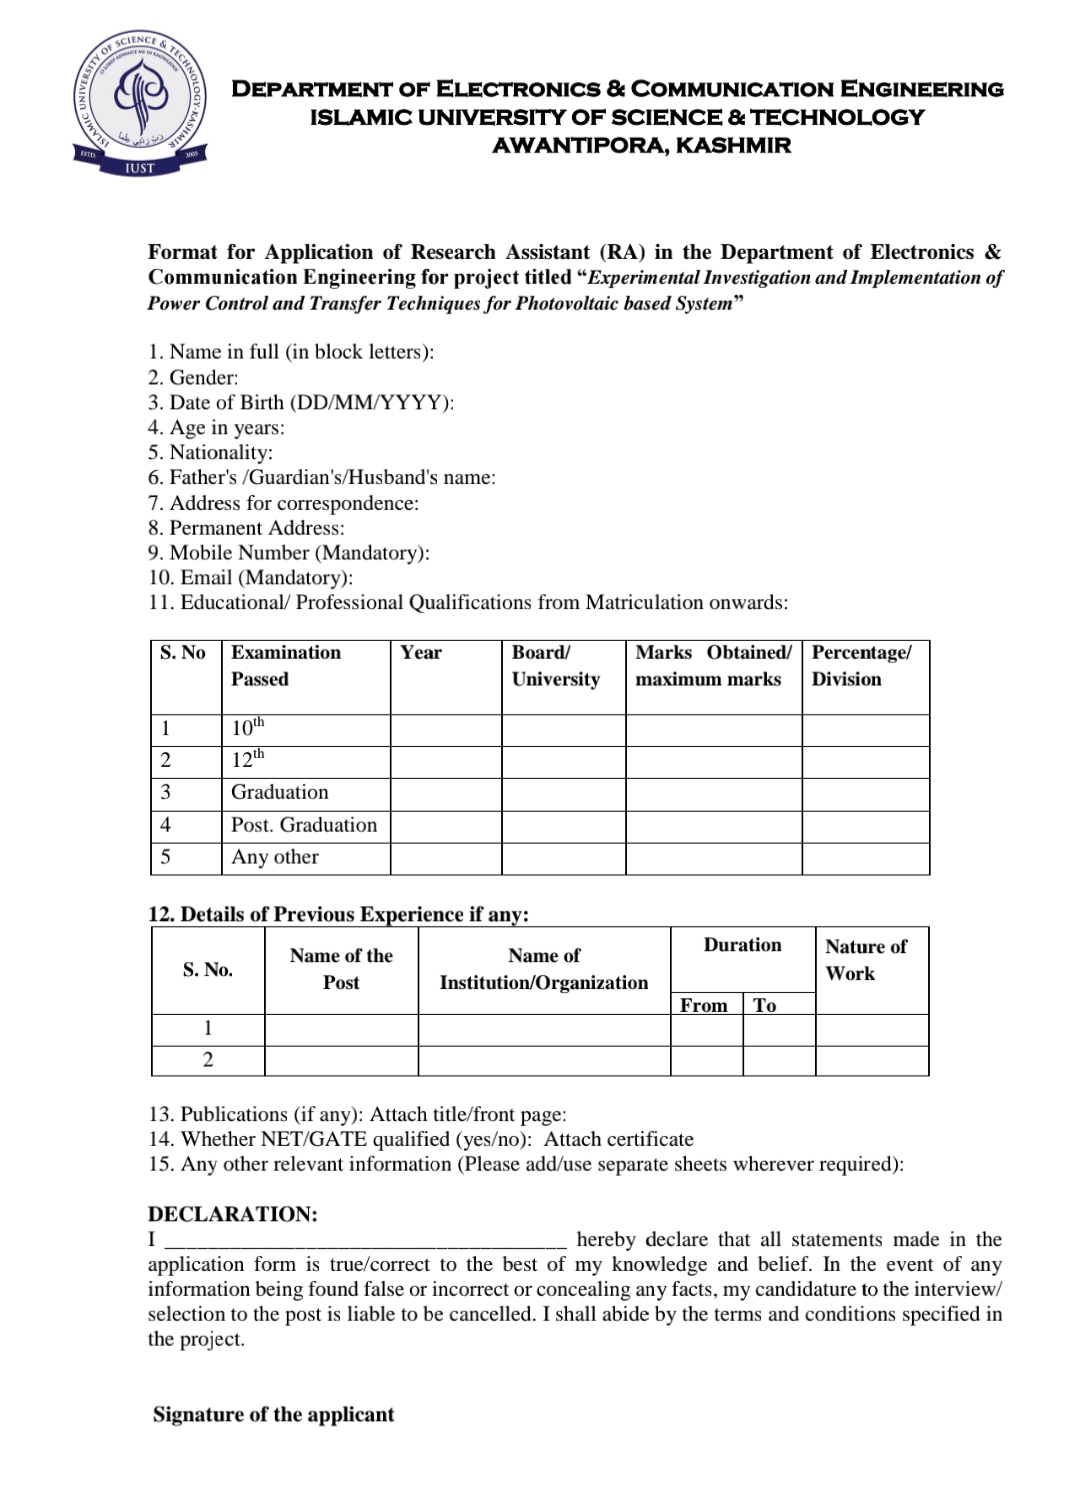 IUST KASHMIR DEPTT OF ELECTRONICS AND COMMUNICATION ENGINEERING RESEARCH ASSISTANT ADVERTISEMENT NOTICE 2024